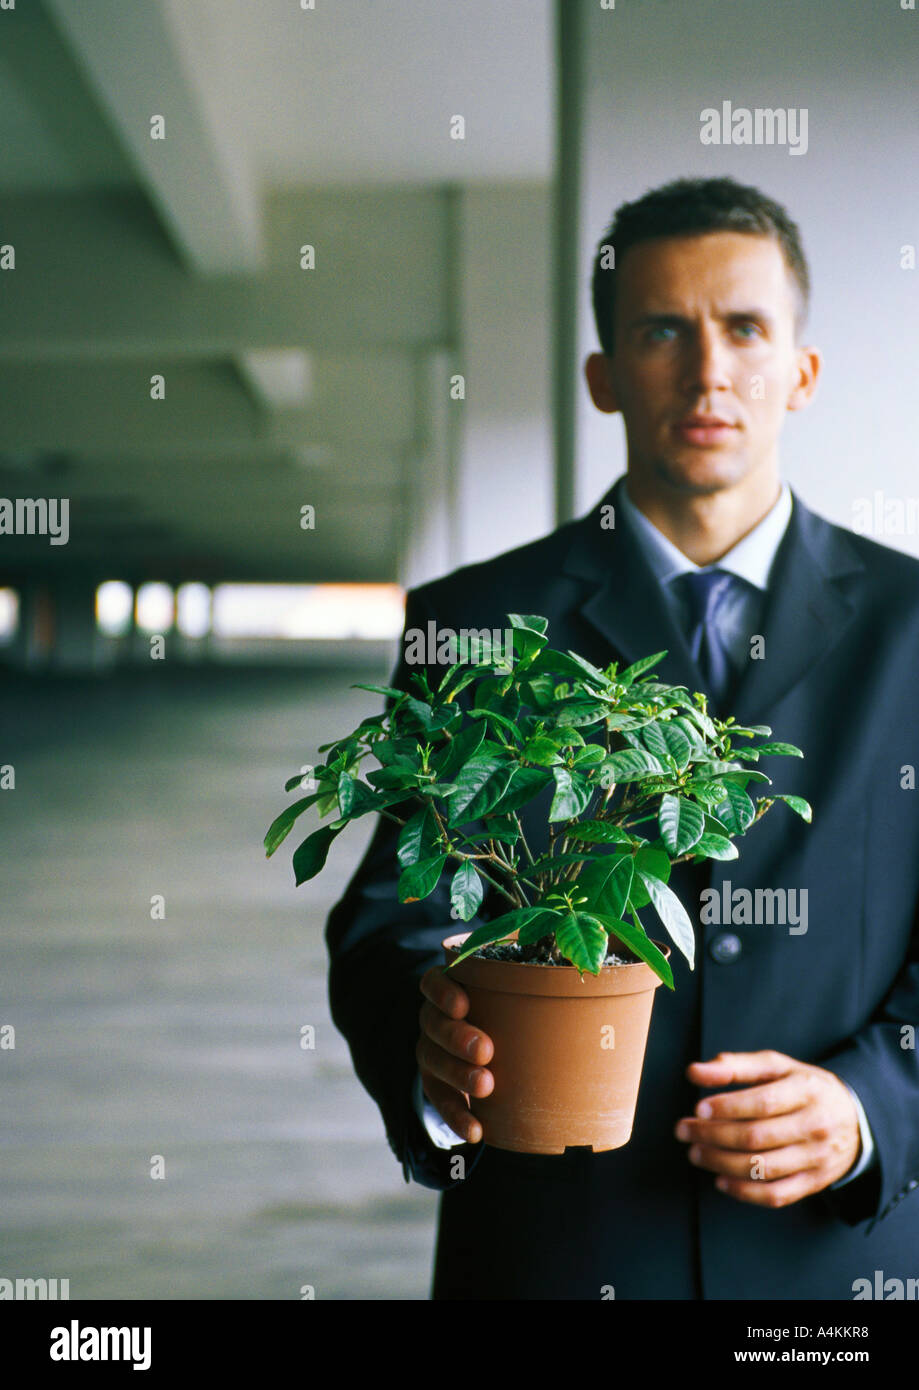 Businessman holding potted plant, looking at camera Banque D'Images